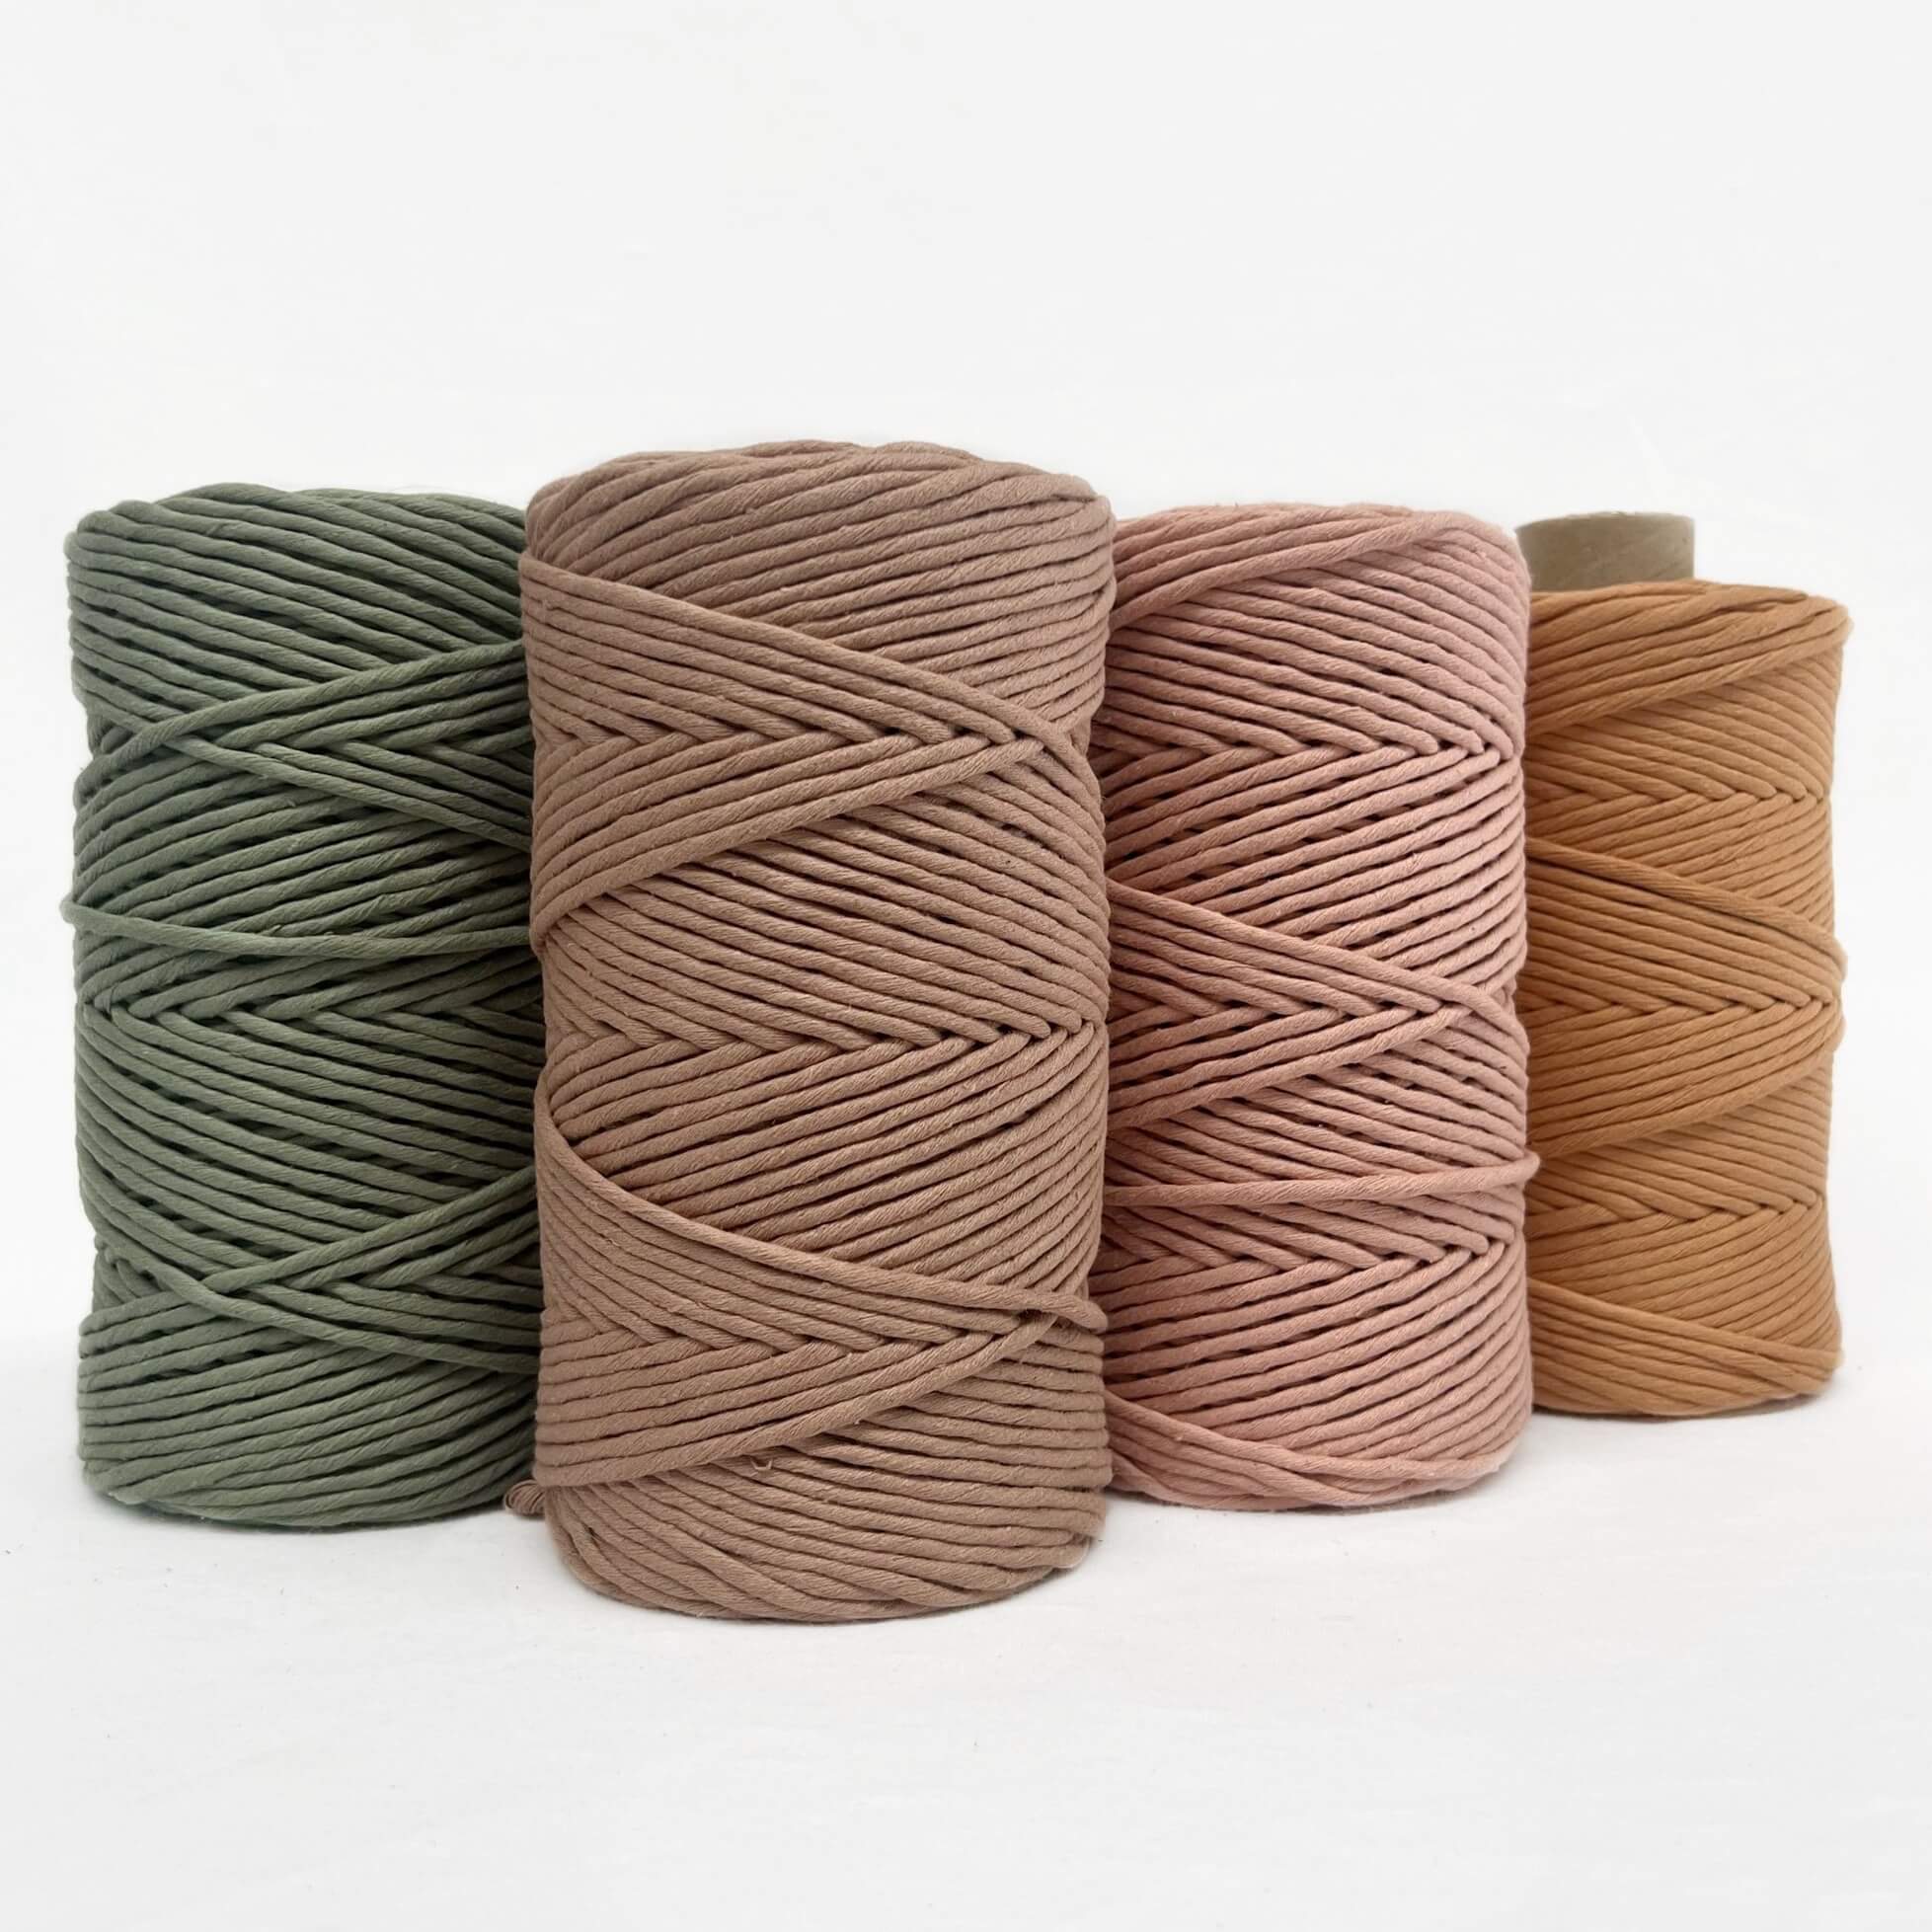 mary maker studio 1kg 5mm recycled cotton macrame string in vintage desert sage colour buy online for macrame workshops beginners and advanced artists